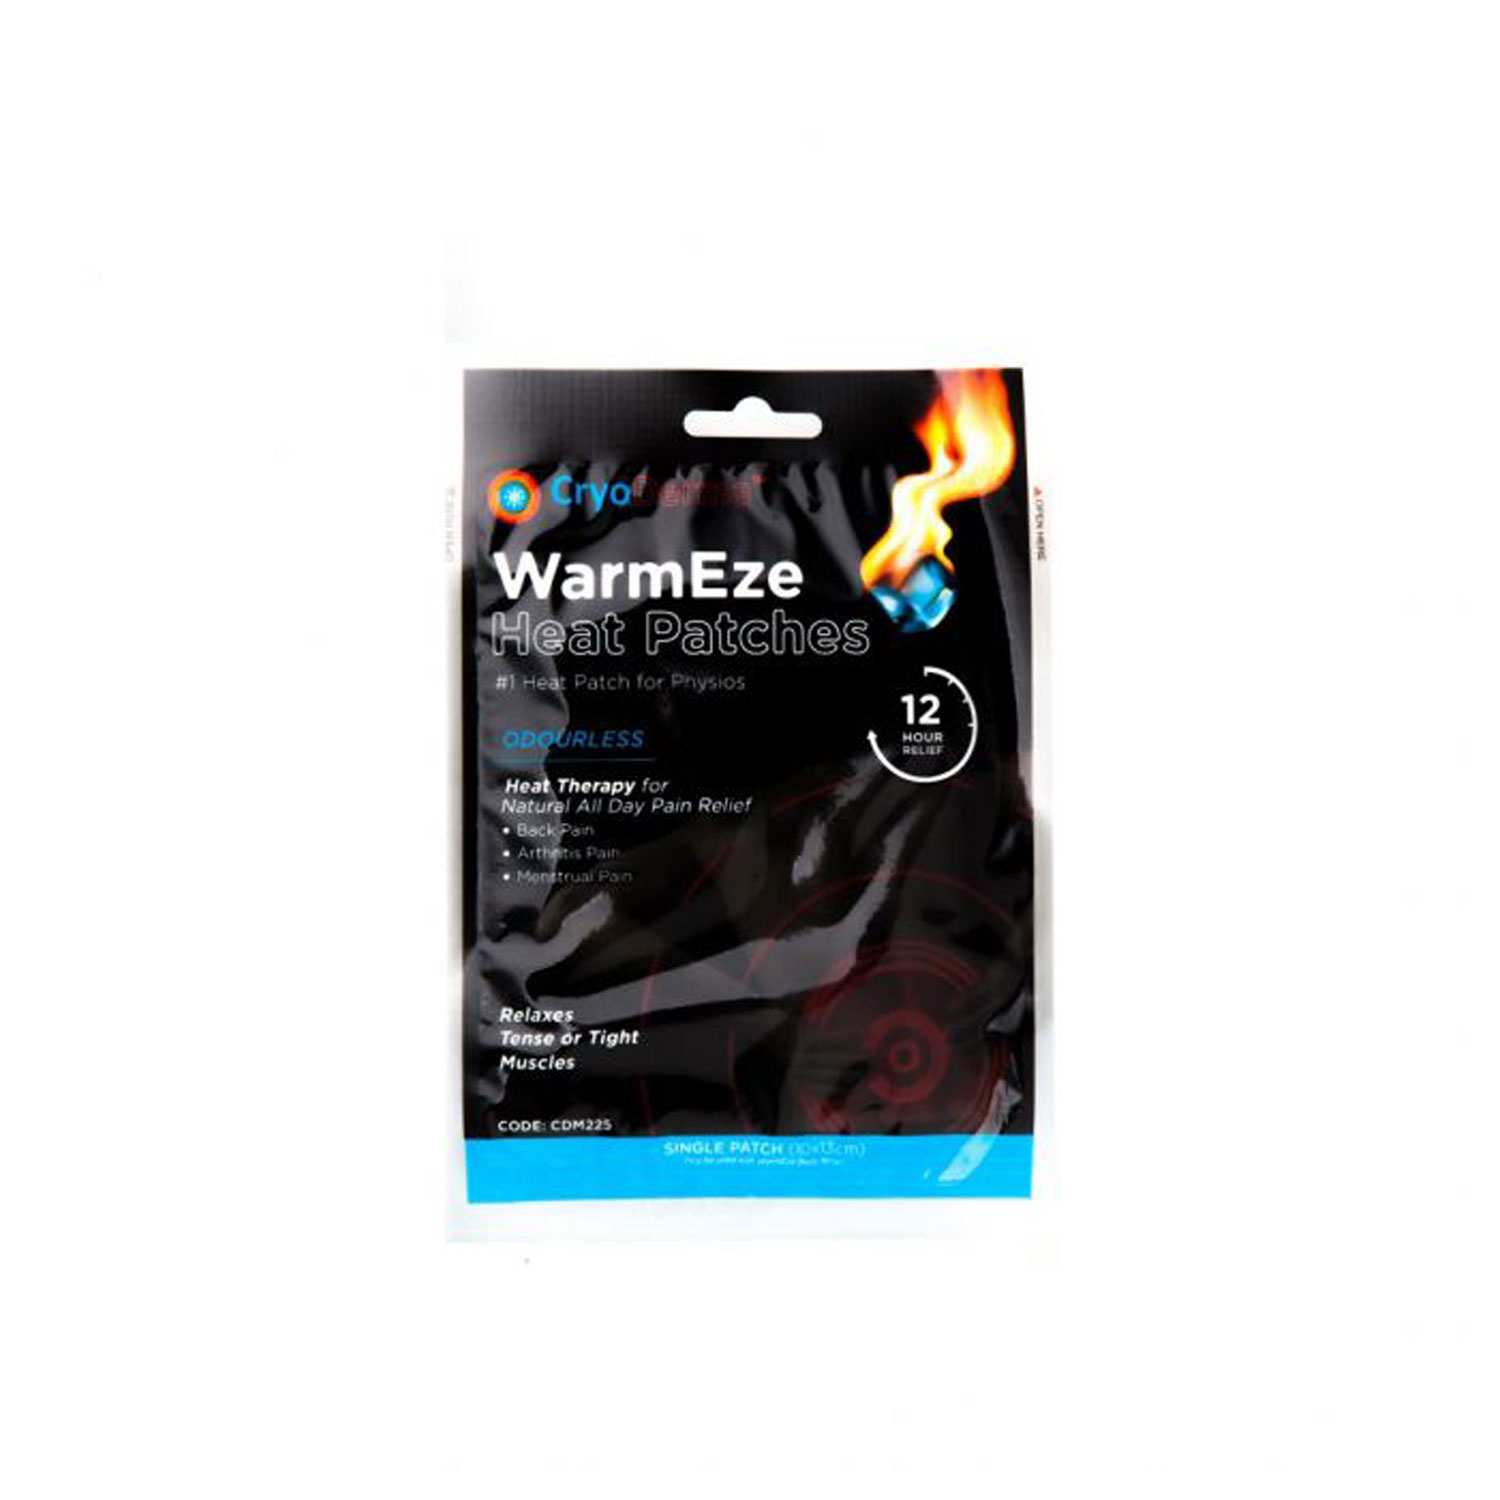 Cryoderma Warm-Eze Heat Patches Physio Shop Online